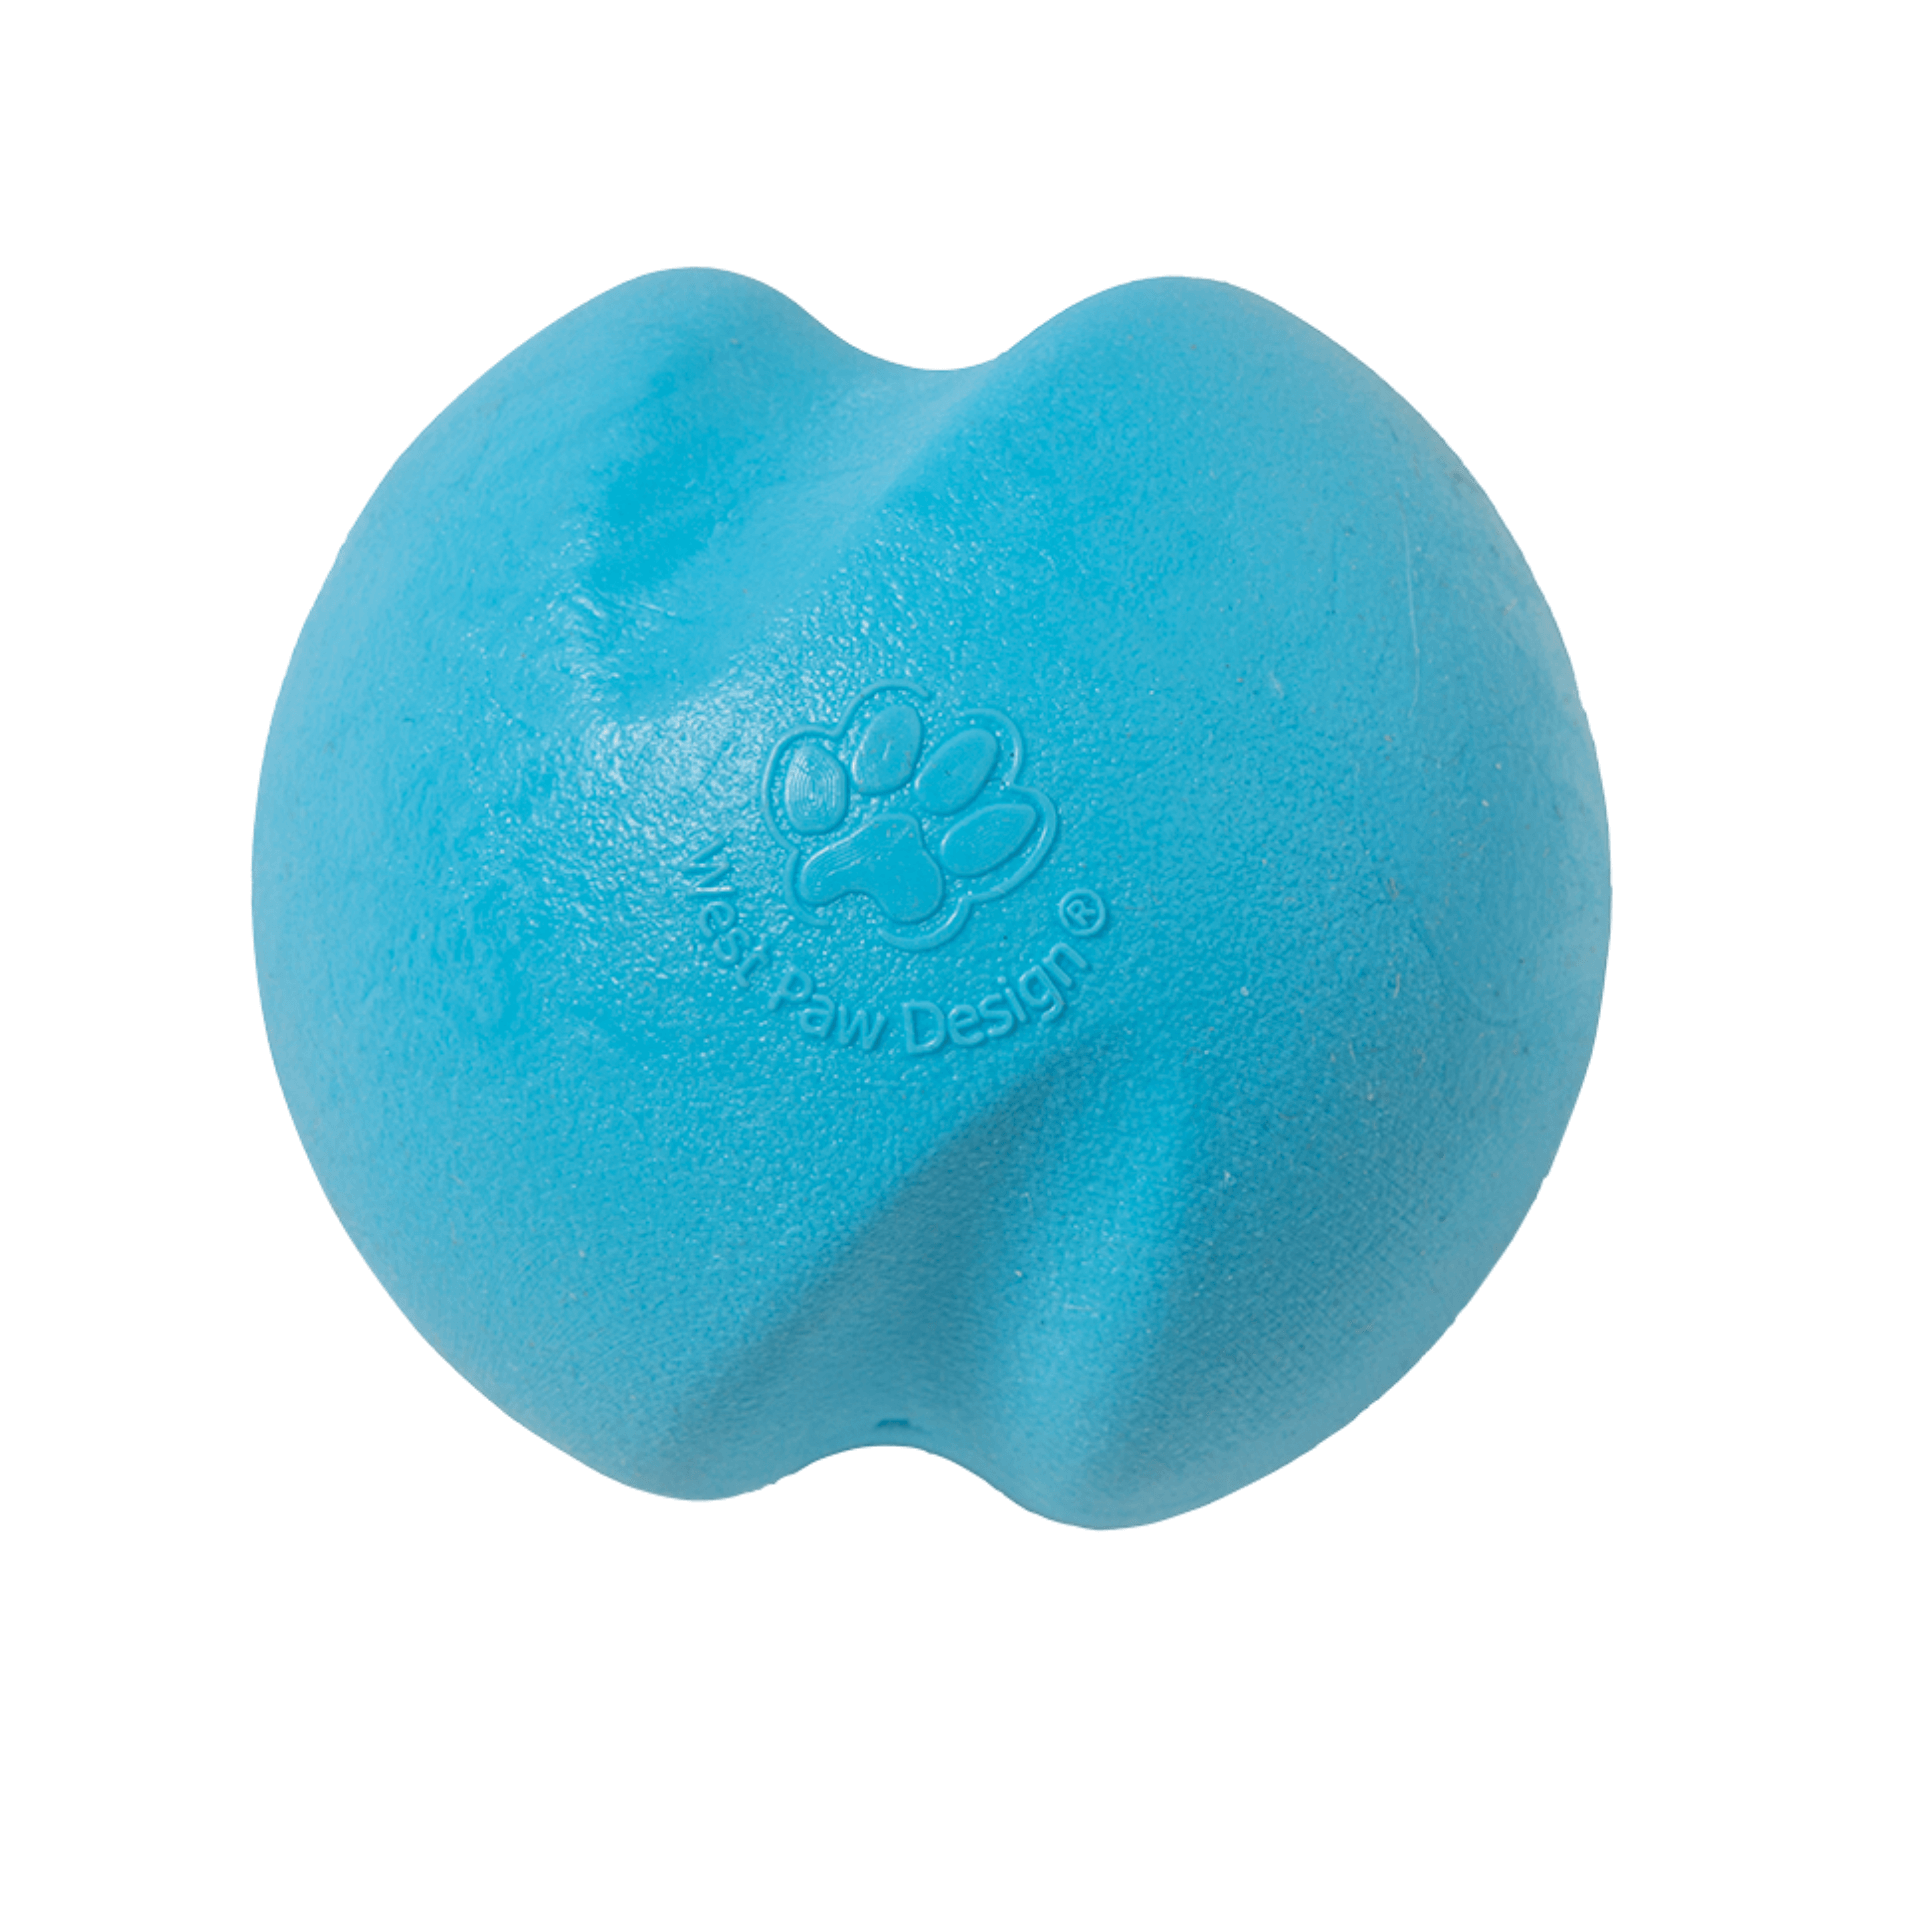 Strong and durable fetch dog toy for your furbaby  Let's Pawty Sydney